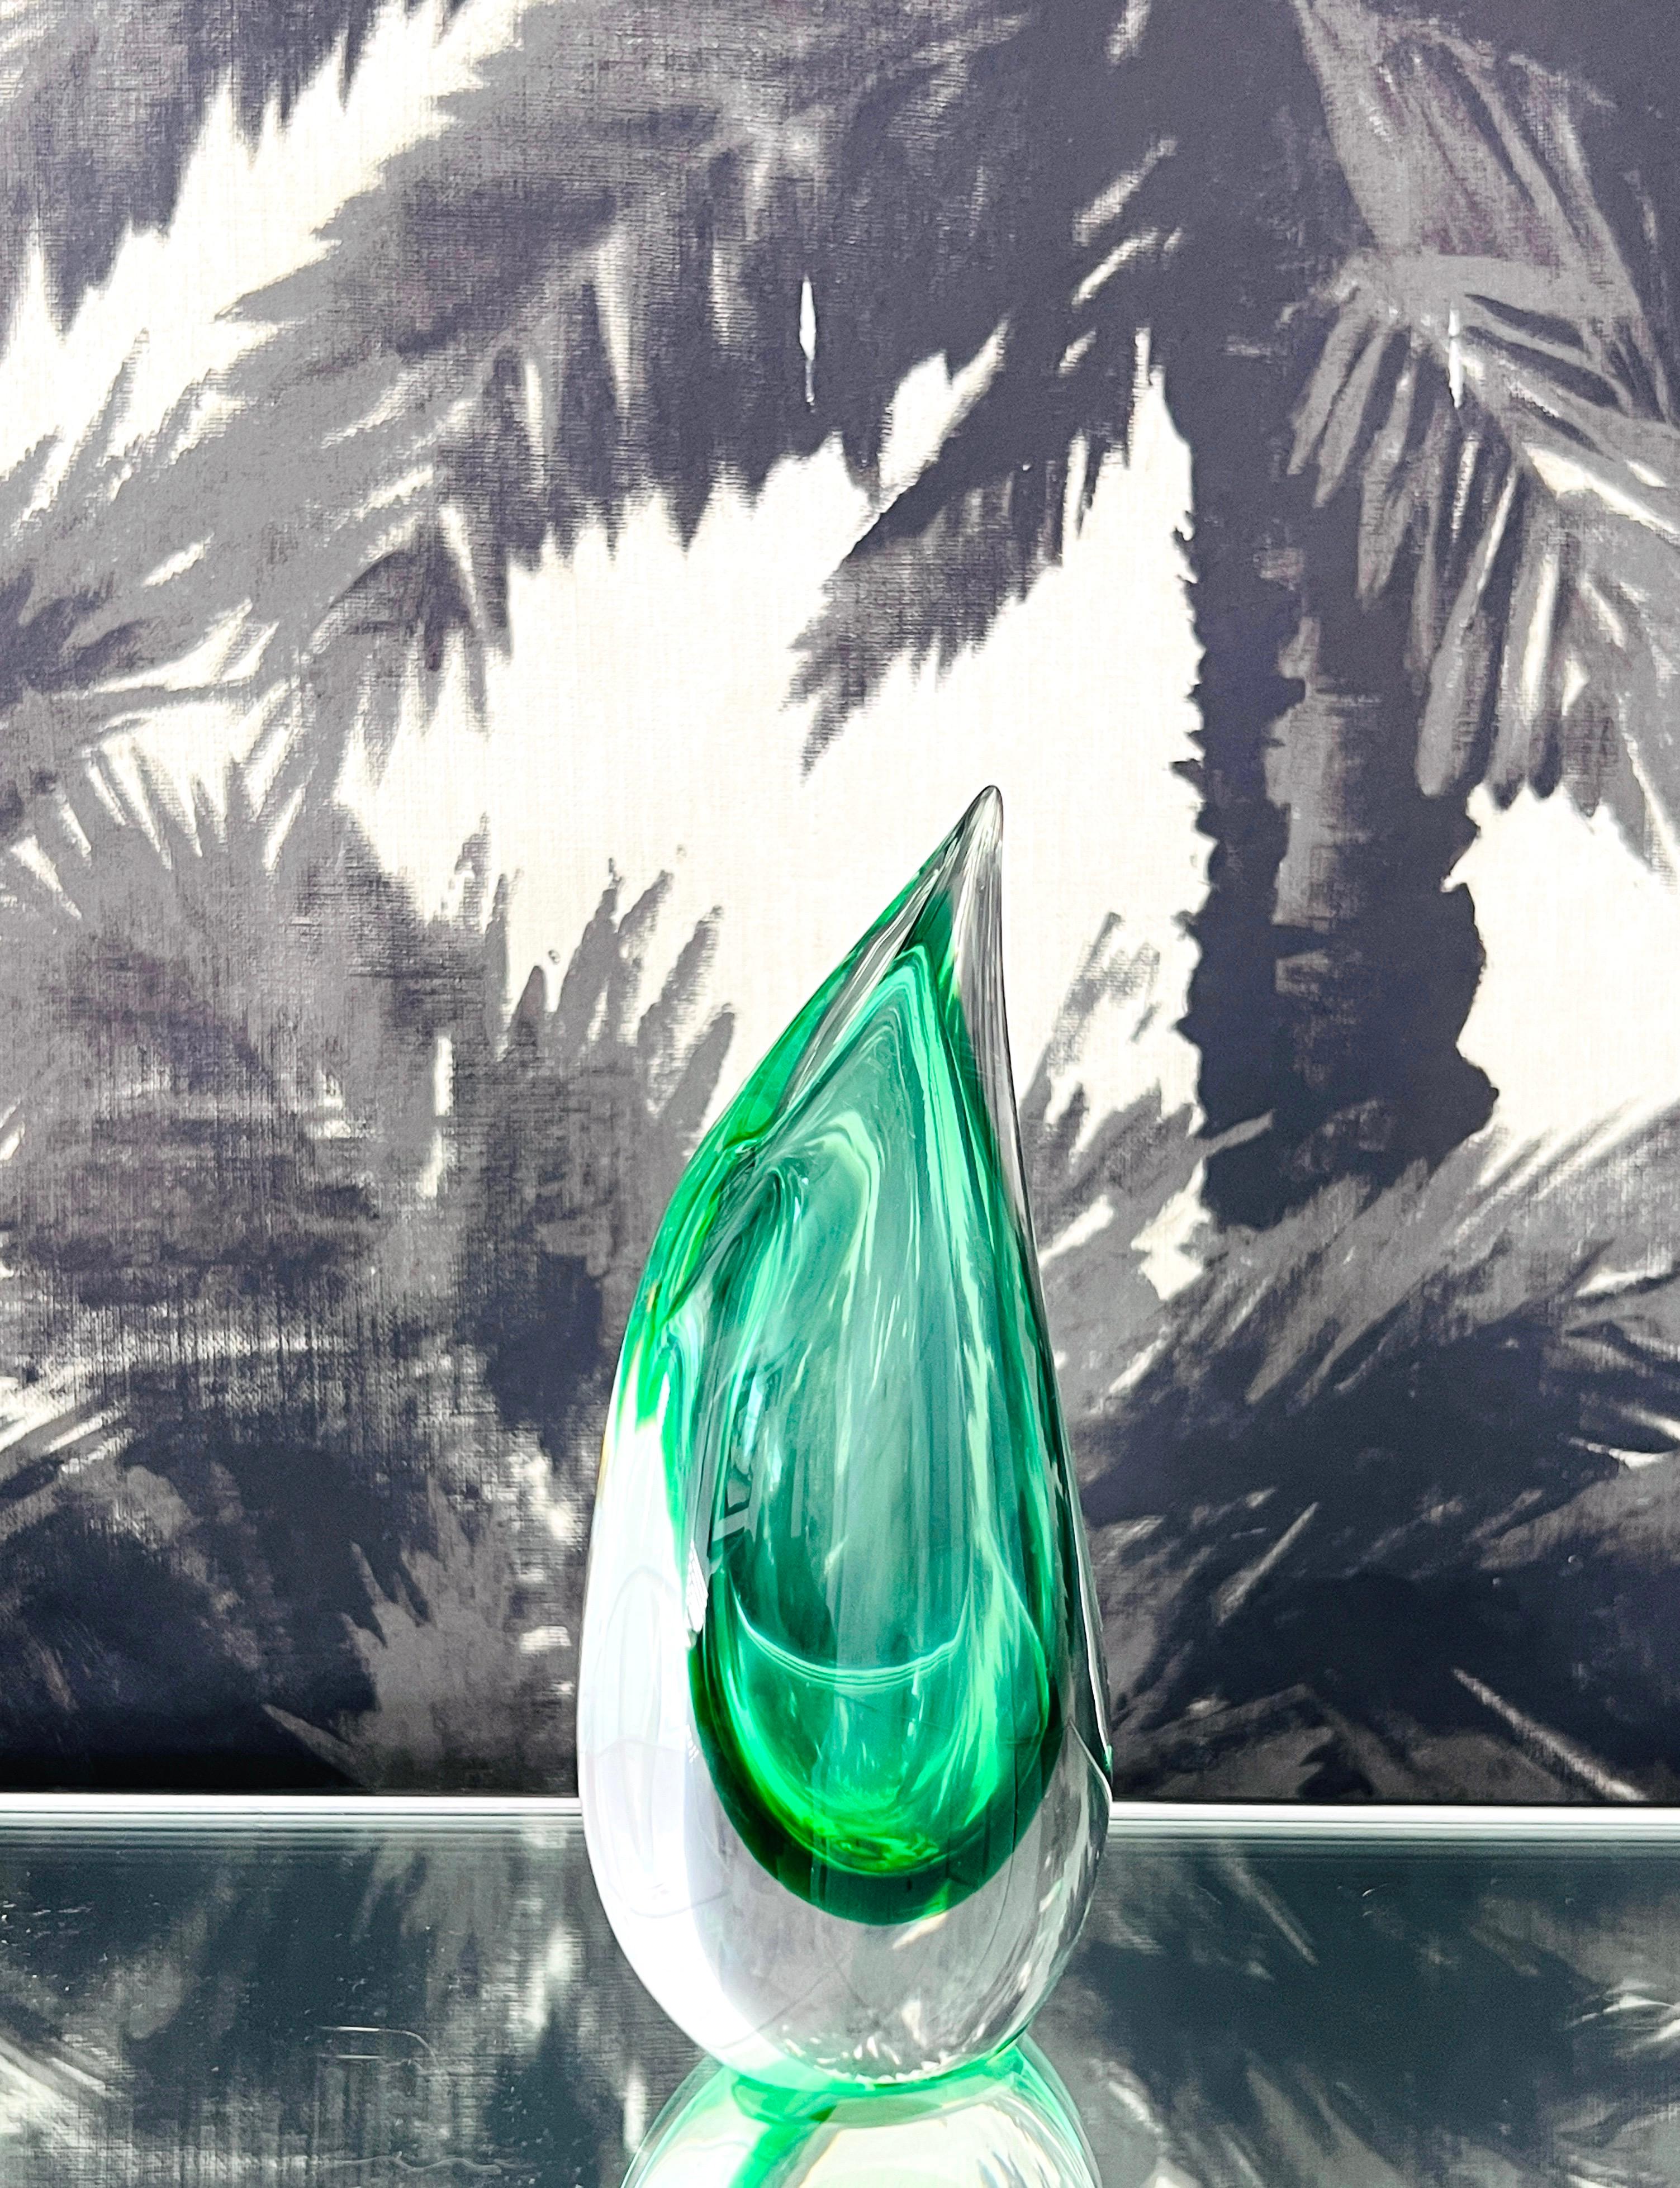 Green Murano Glass Bud Vase with Flame Tip Design by Luigi Onesto, 1970's Signed 1